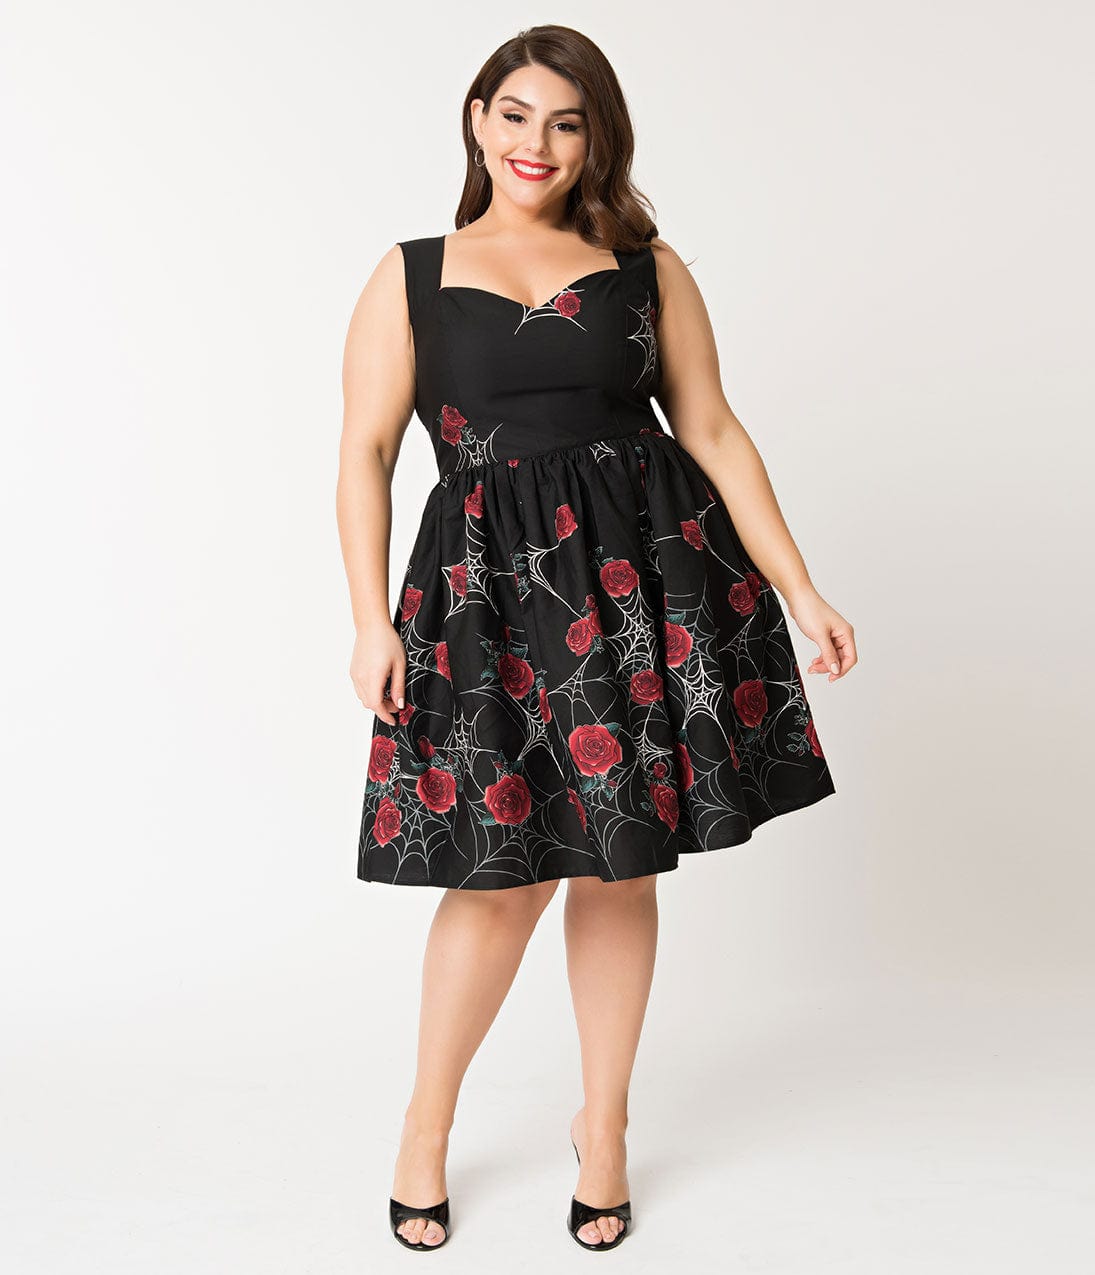 1950s Plus Size Dresses, Clothing and Costumes